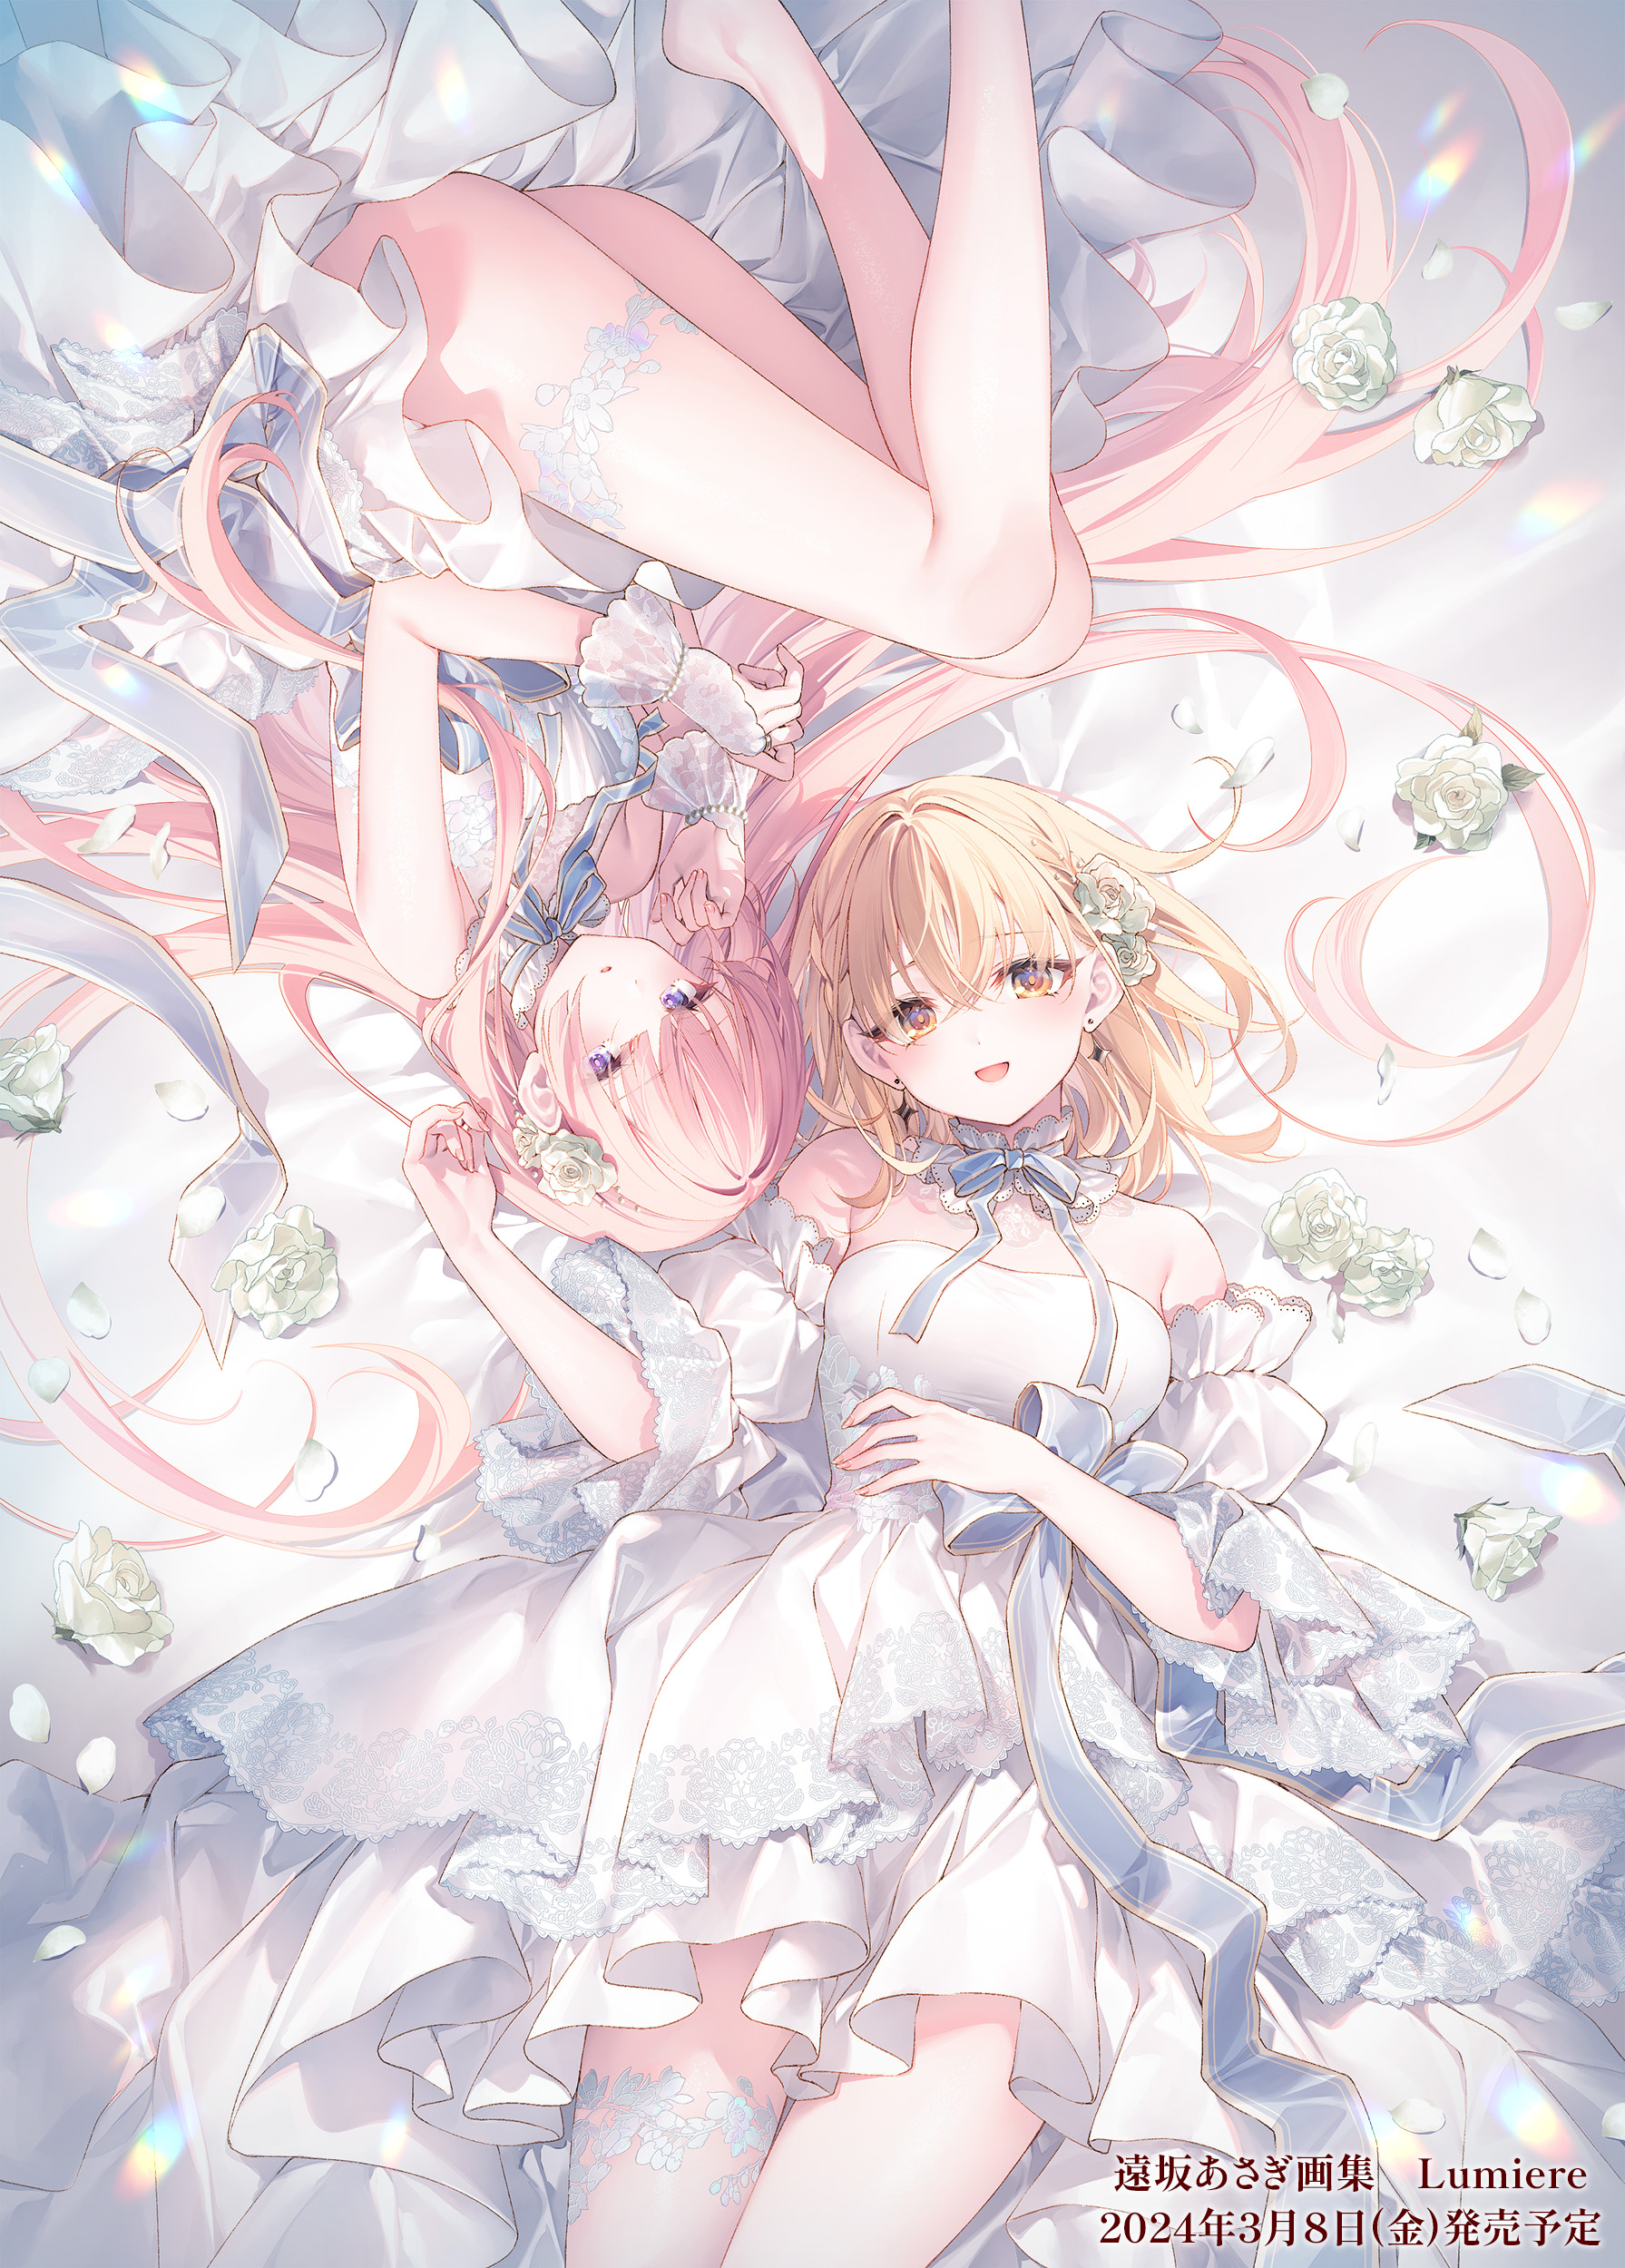 Anime 1791x2500 anime anime girls Toosaka Asagi long hair Butareba: The Story of a Man Turned into a Pig portrait display dress looking at viewer flowers sleeveless bare shoulders Jess Yesma Japanese 2024 (year) kanji lying down lying on back hair between eyes smiling earring flower in hair white dress bow tie bent legs upskirt floral frills white hair spread out petals french braids ribbon